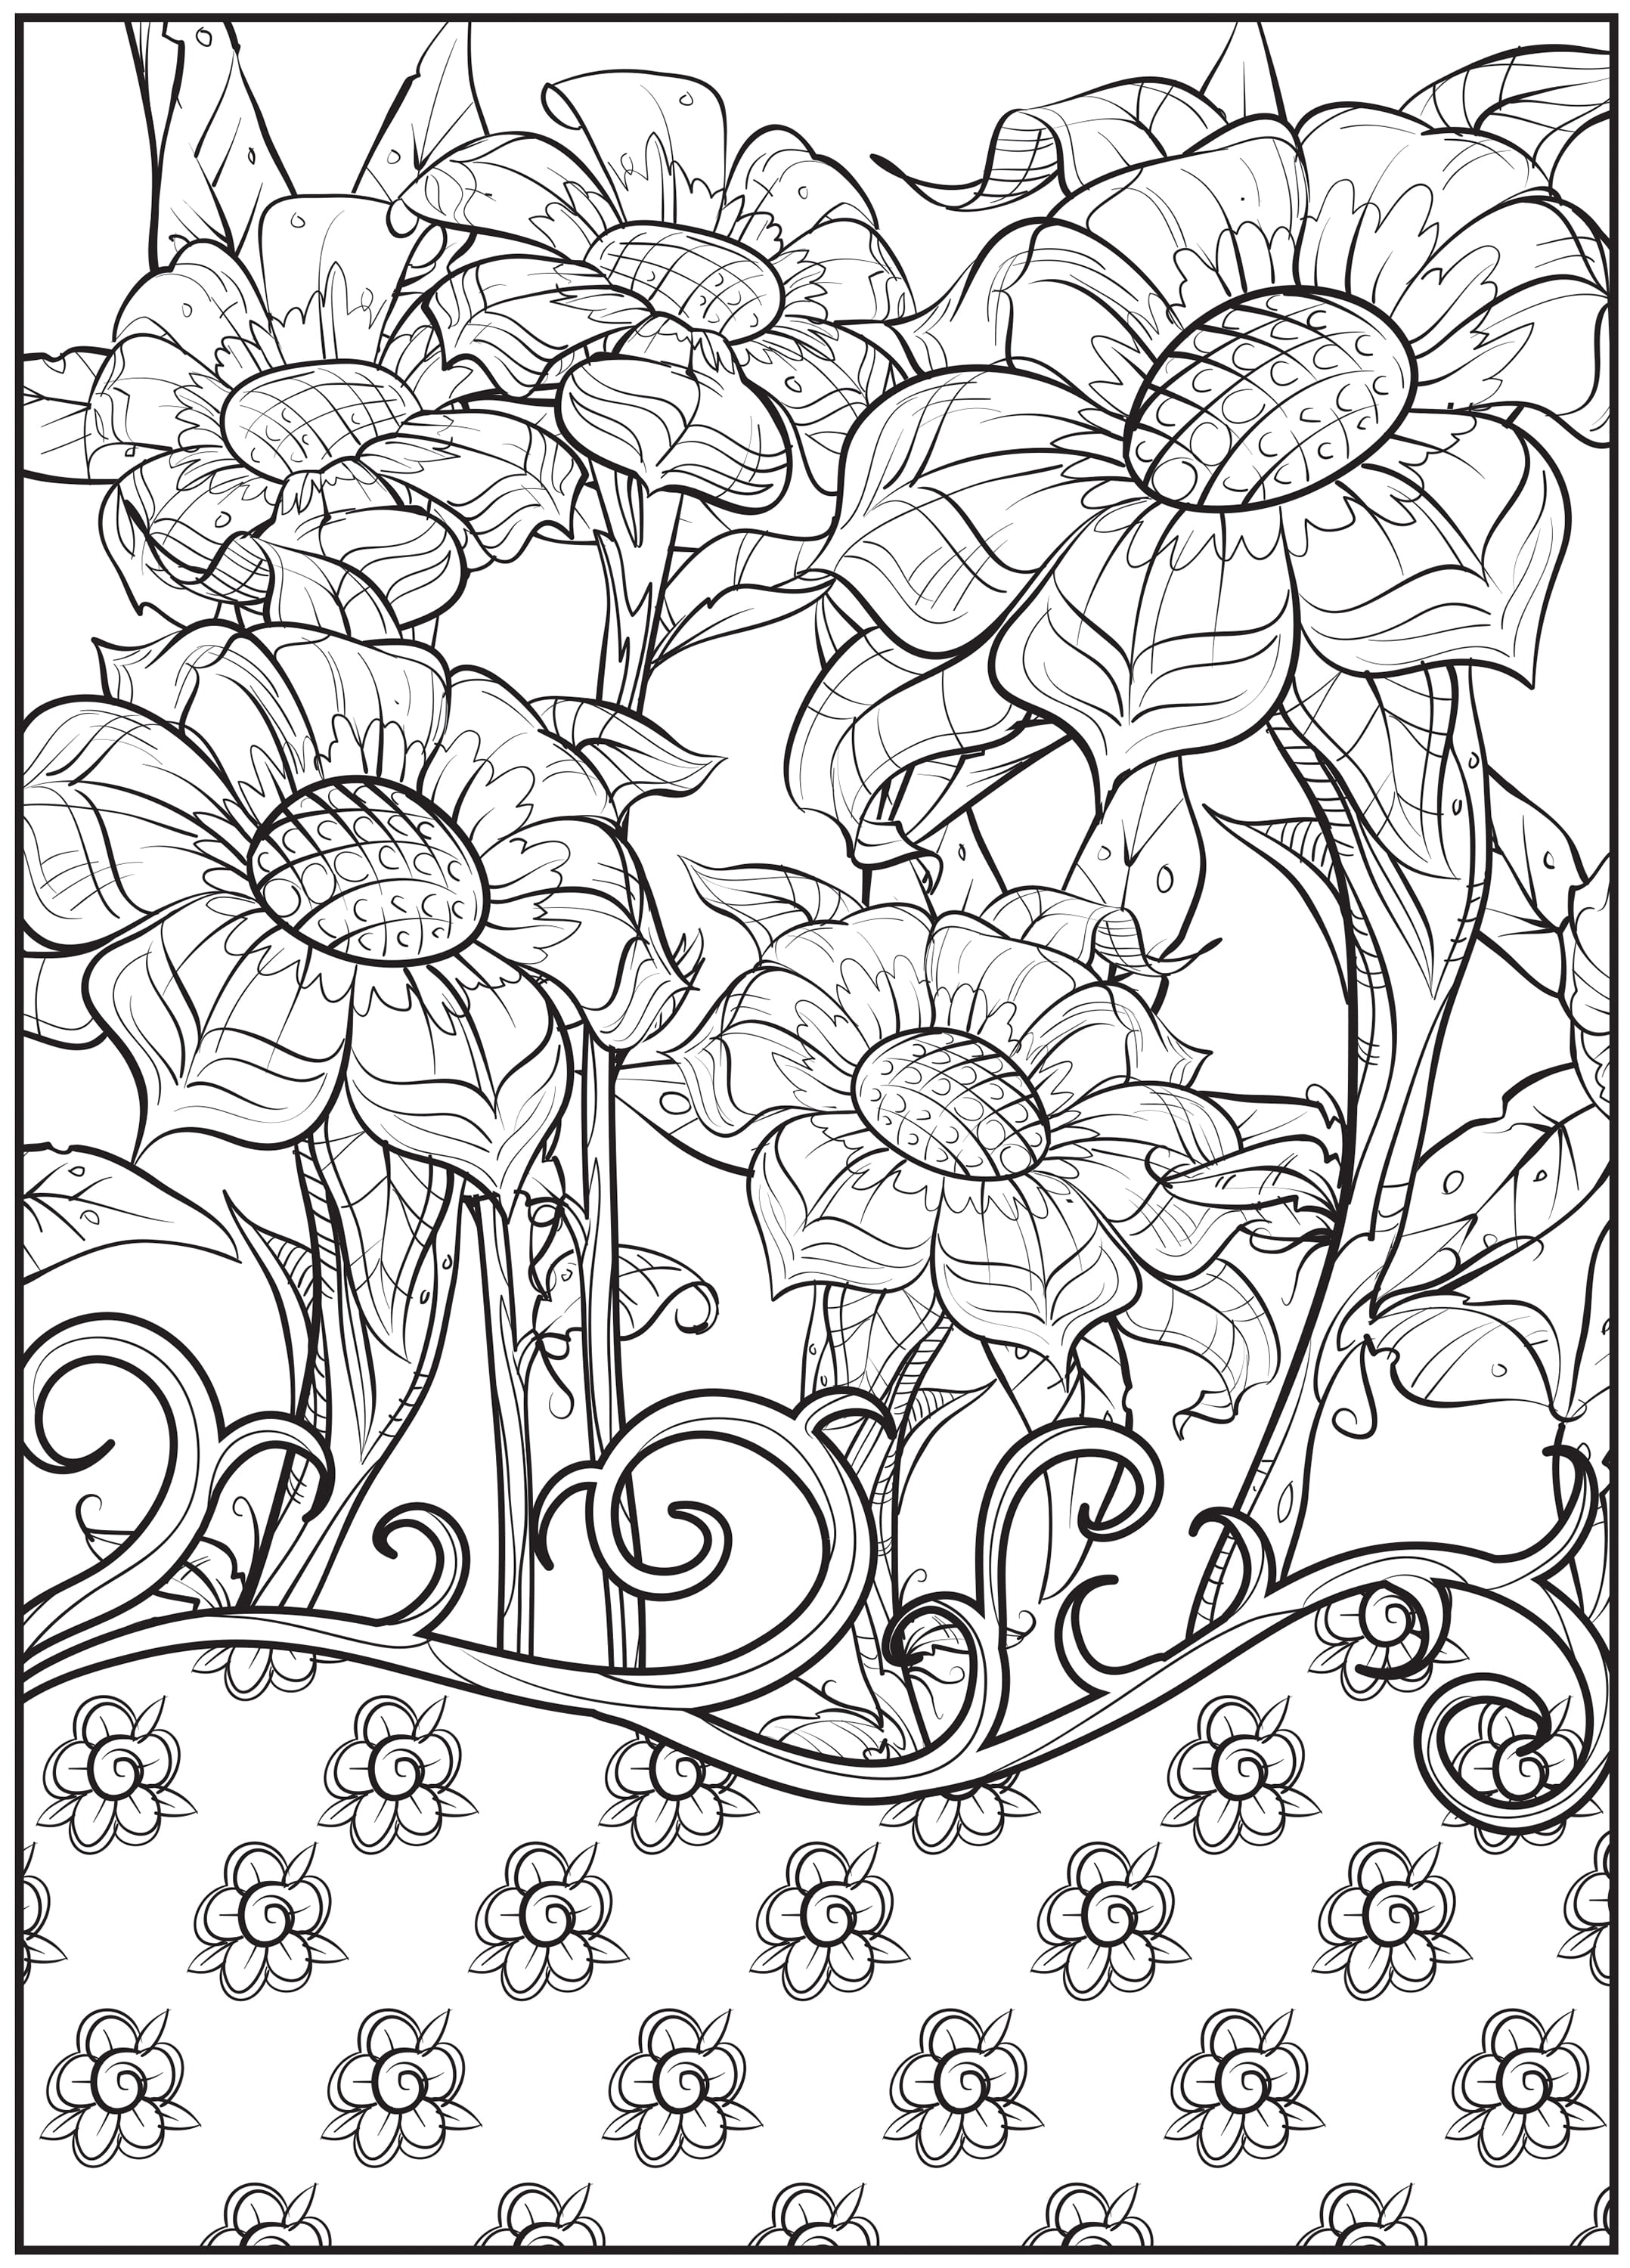 Cra-Z-Art Timeless Creations Adult Coloring Book, Fabulous Florals, 64 Pages